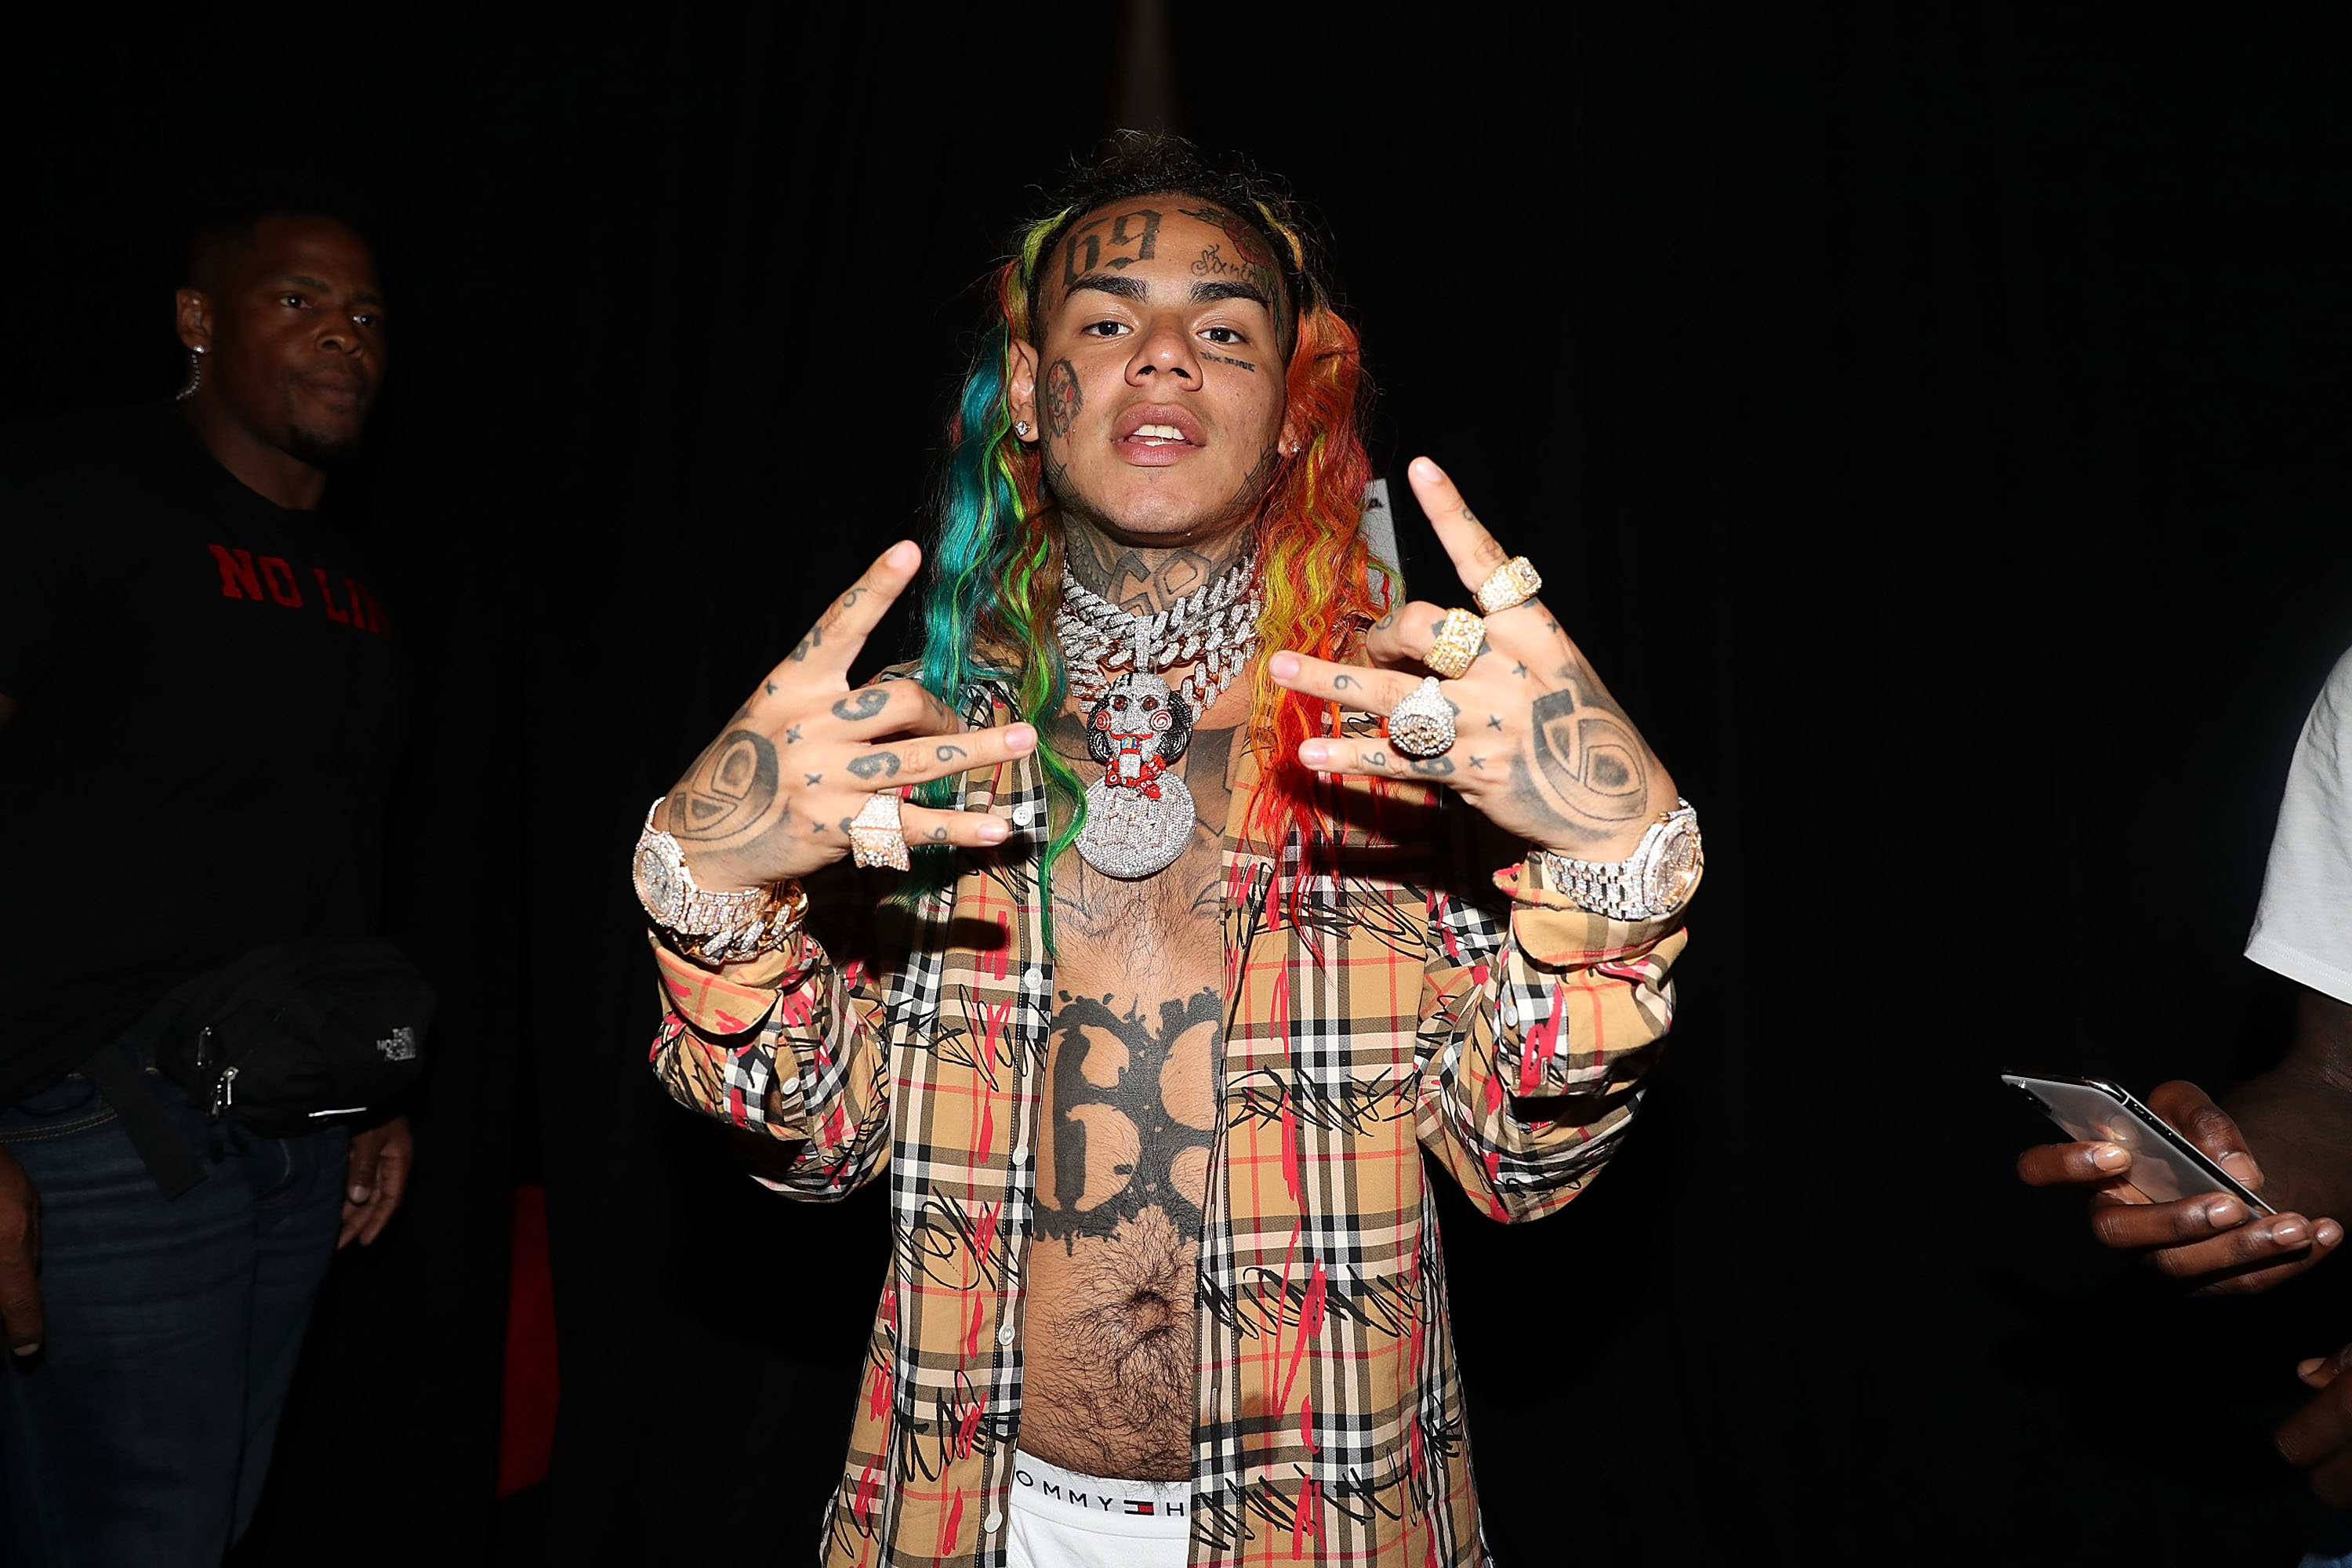 6ix9ine’s Baby Mama Says His Gym Assault Is Embarrassing For Their 7-Year-Old Daughter